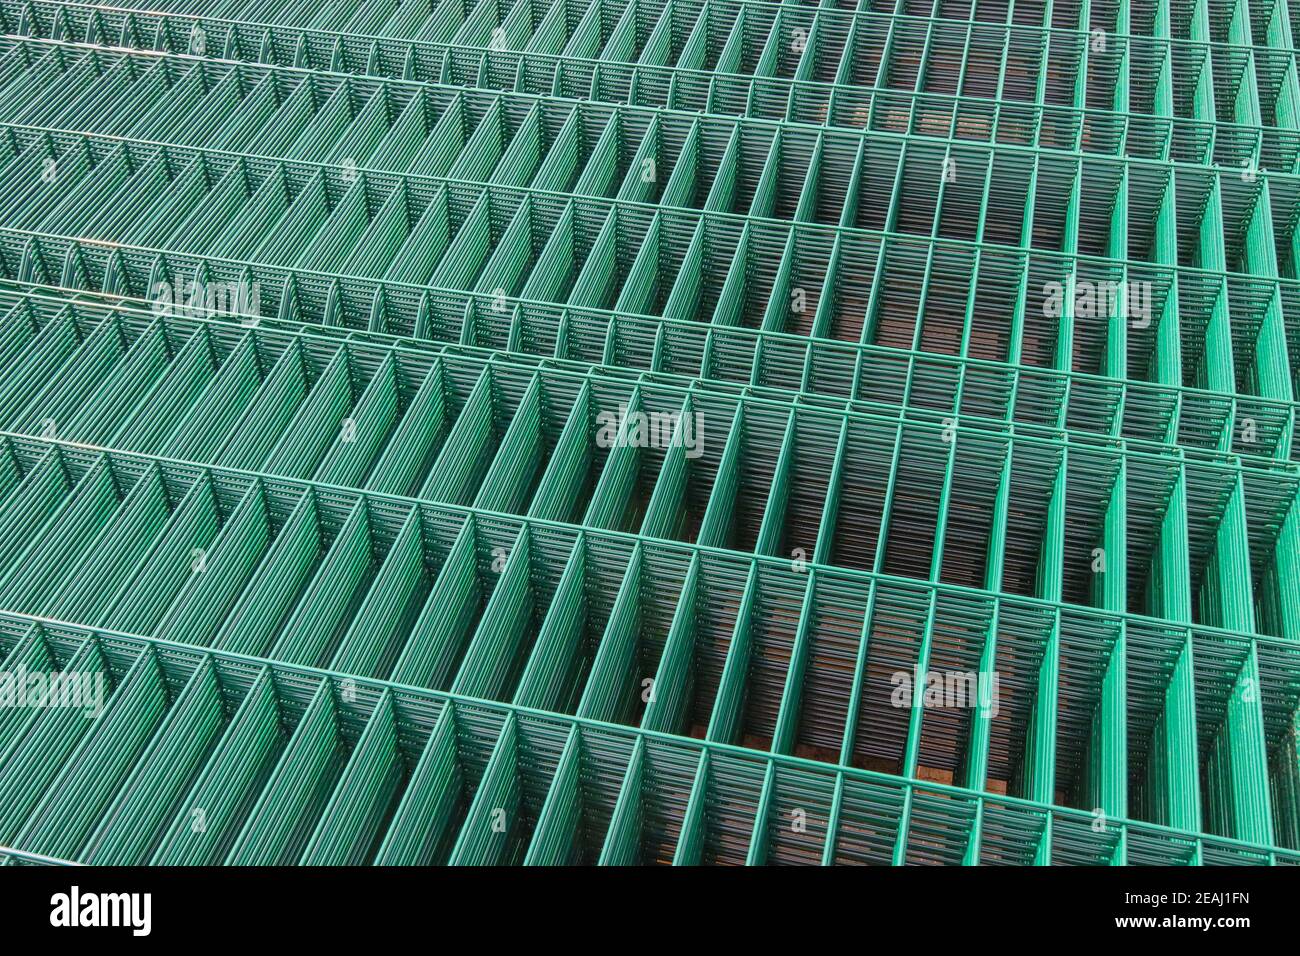 Production of metal mesh for fencing. Stock Photo